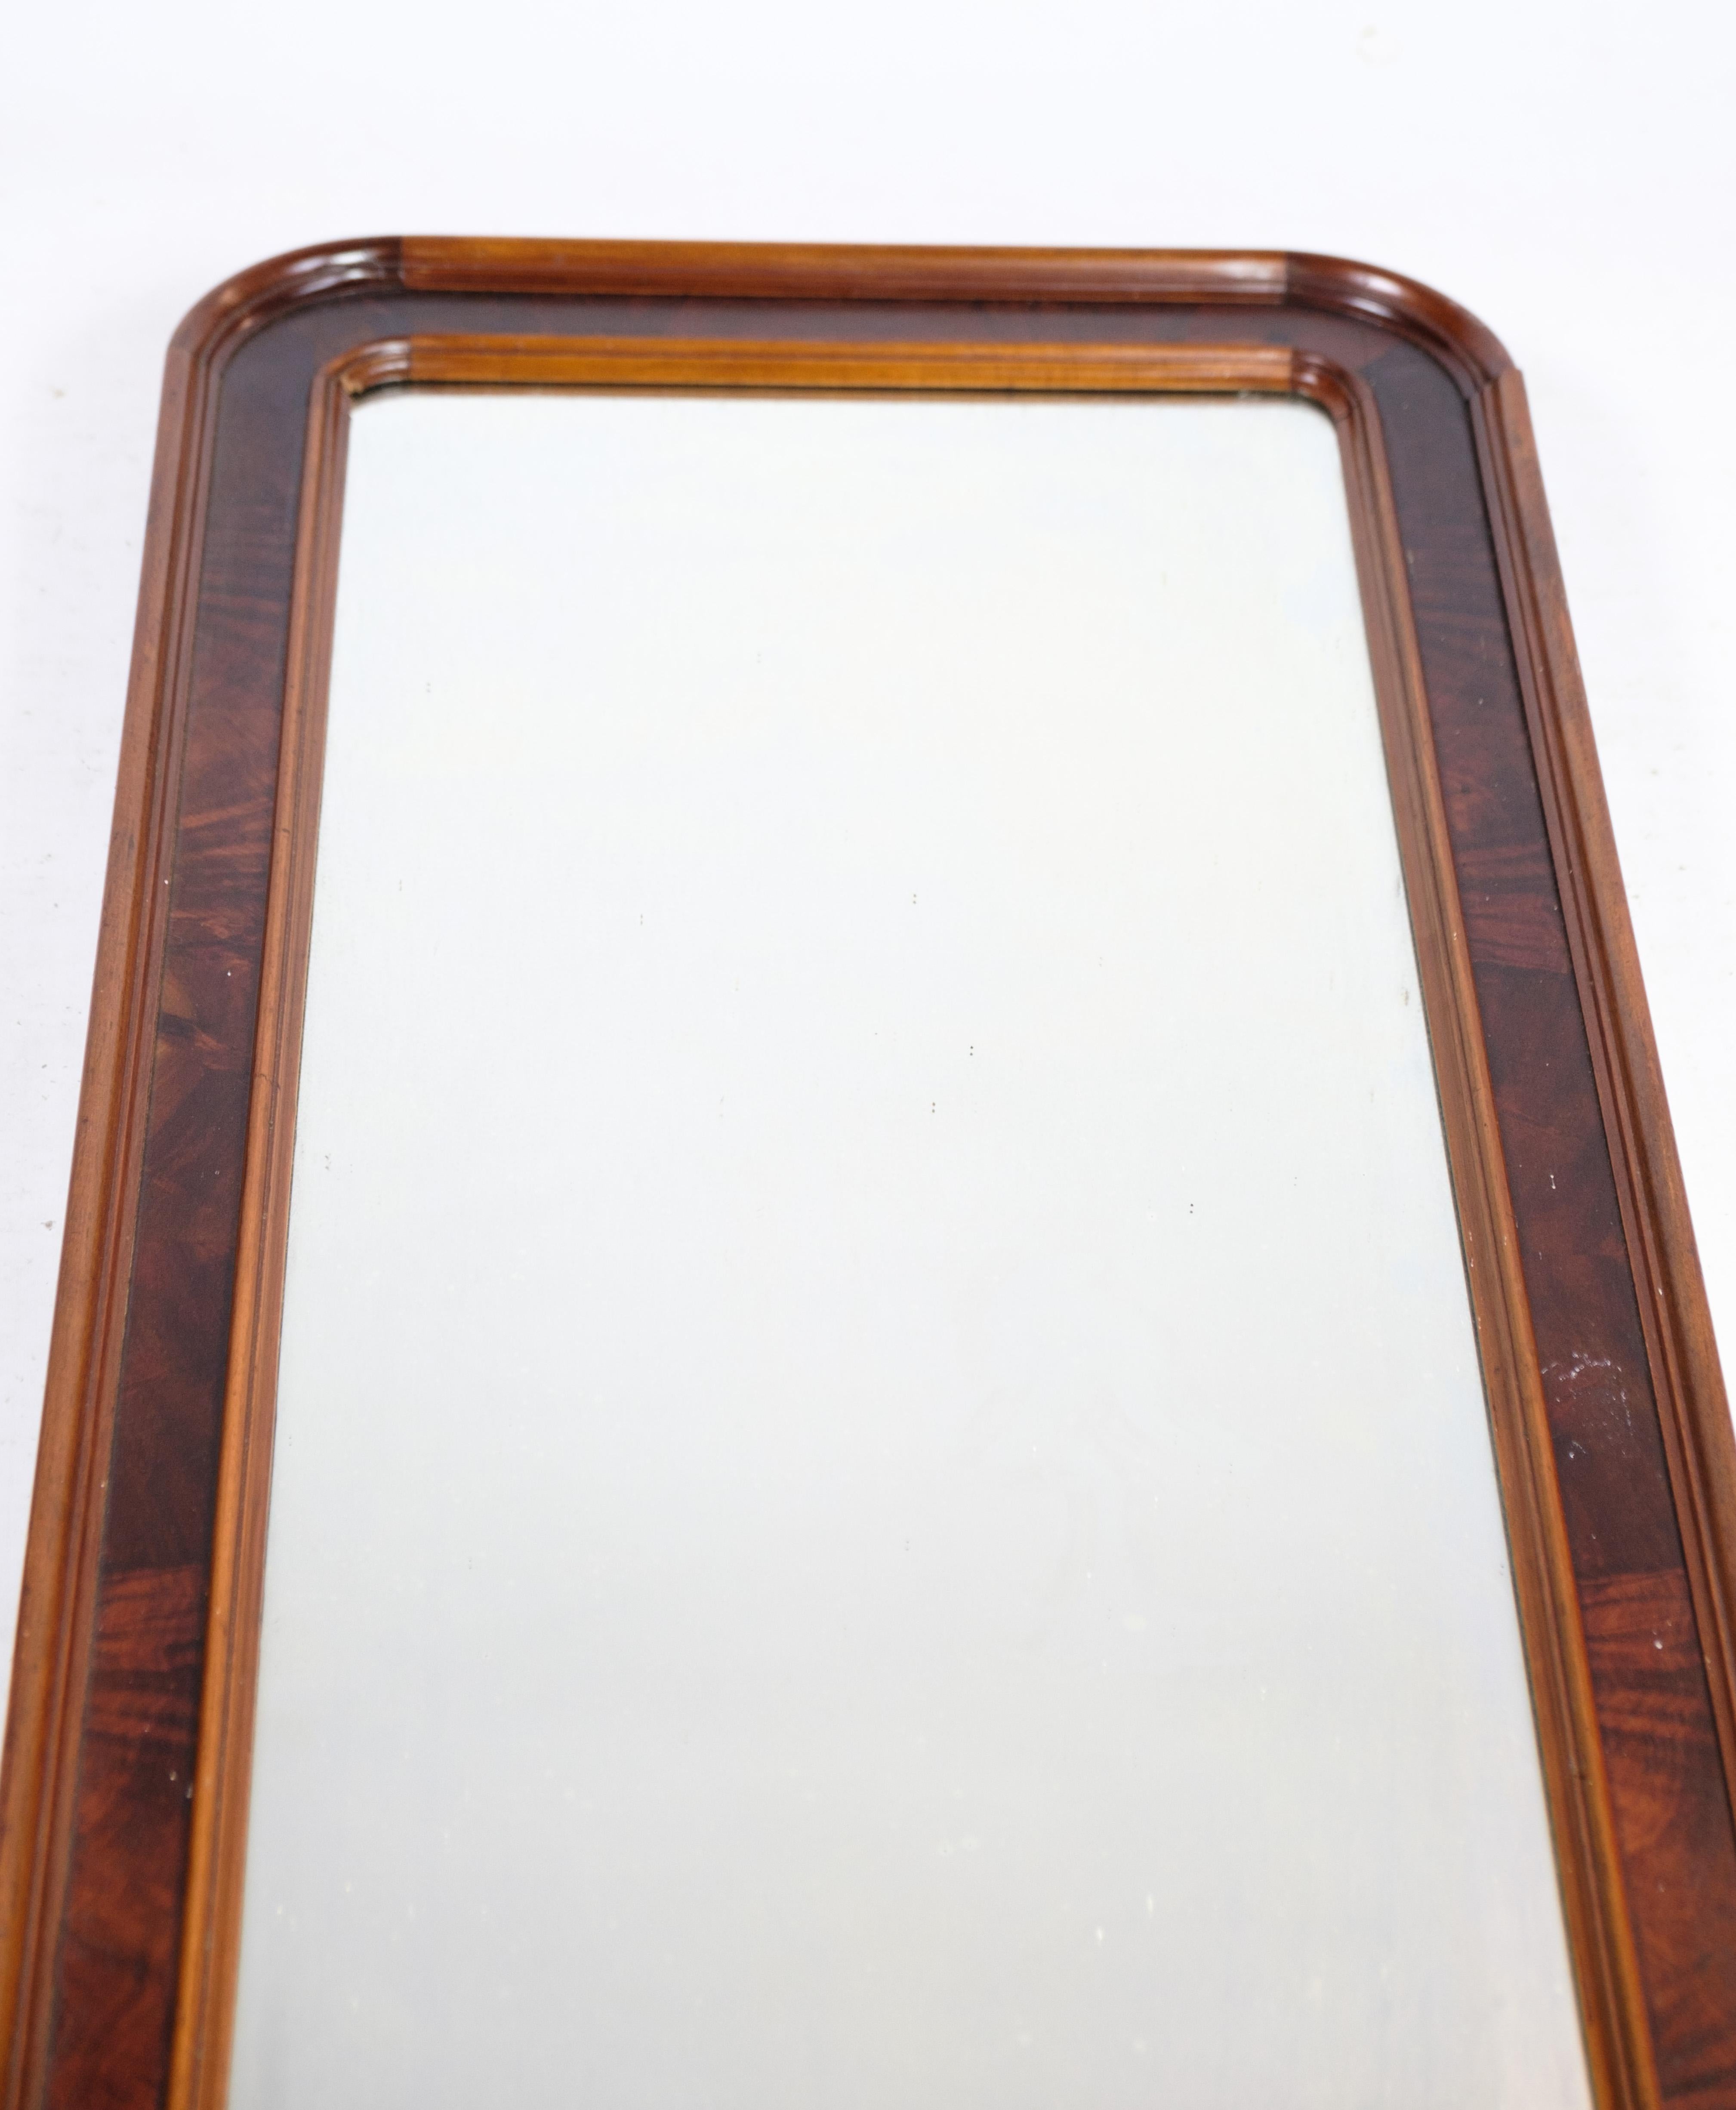 The Mirror of hand-polished mahogany is a beautifully crafted piece of art from the late Empire period. It is made in Denmark, dating back to the 1890s. The mahogany wood is carefully hand-polished, giving it a smooth and lustrous finish. The frame